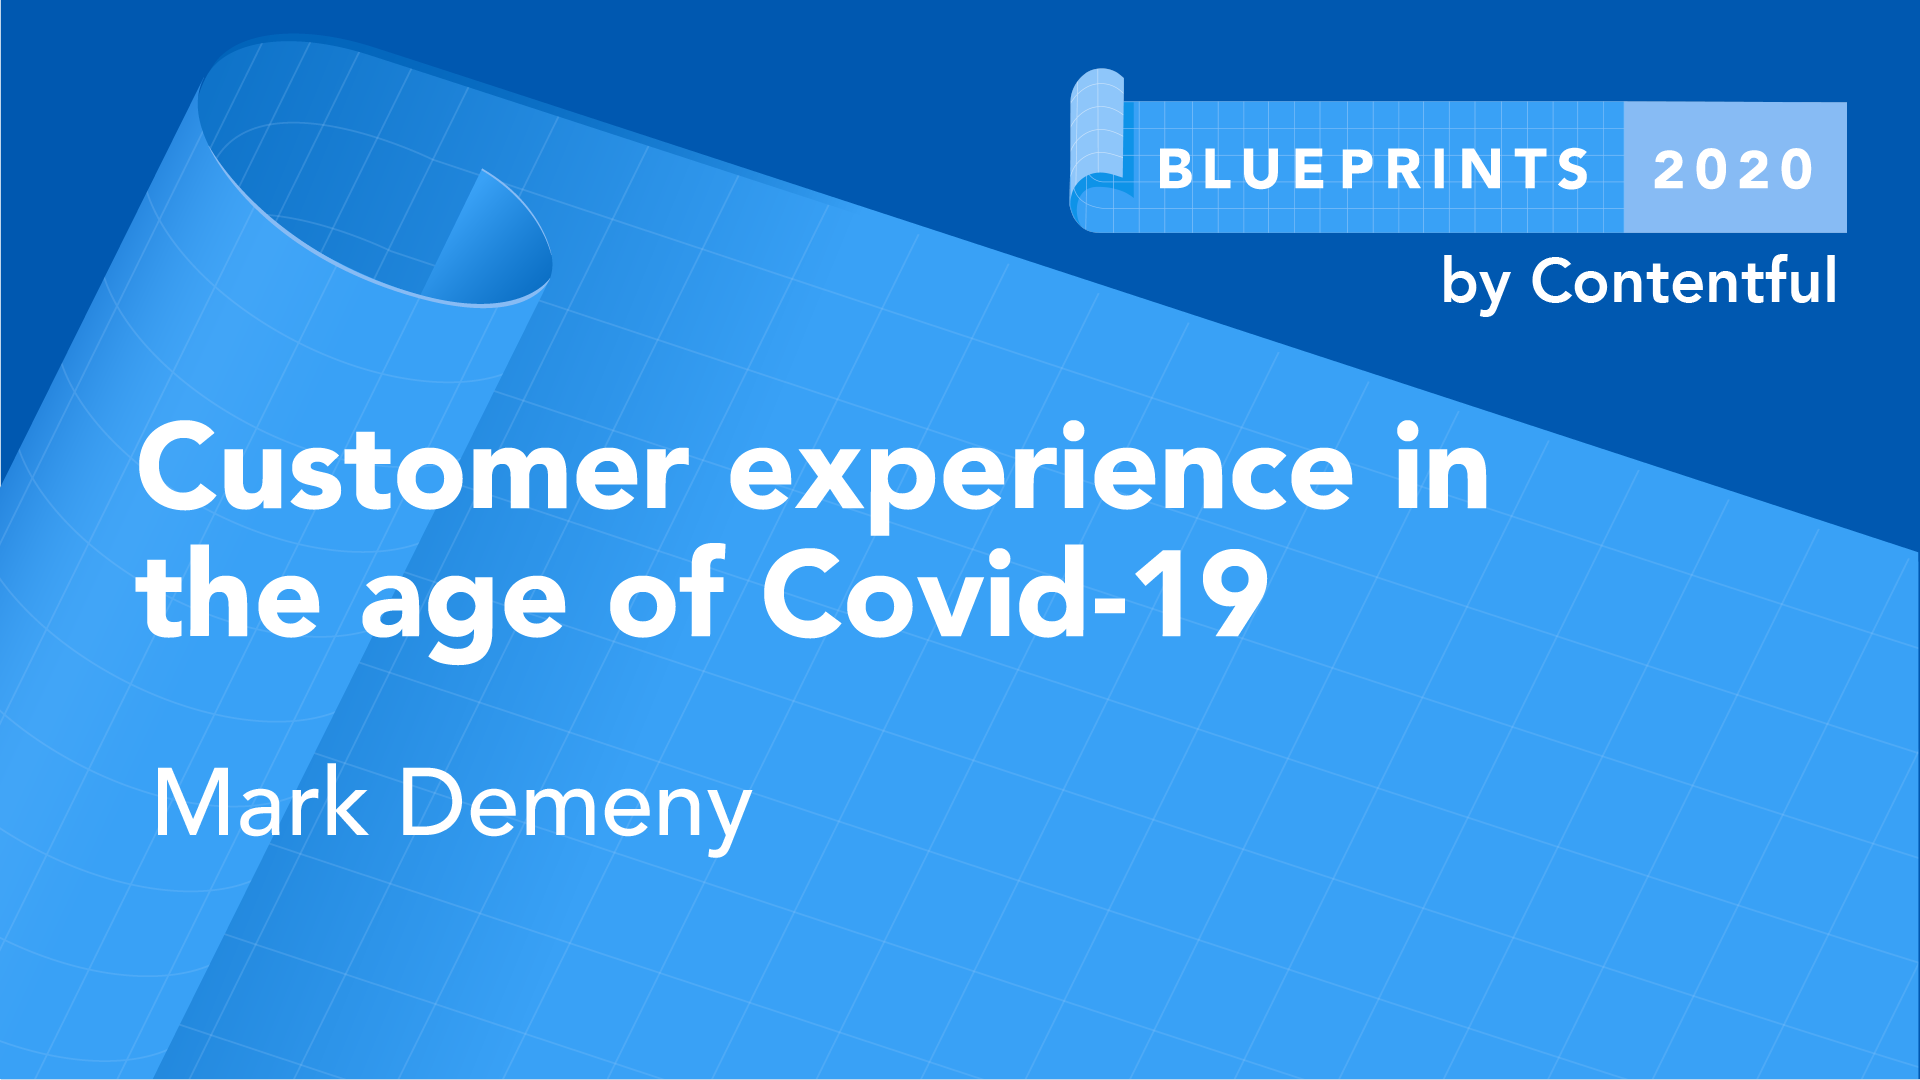 Customer experience in the age of Covid-19